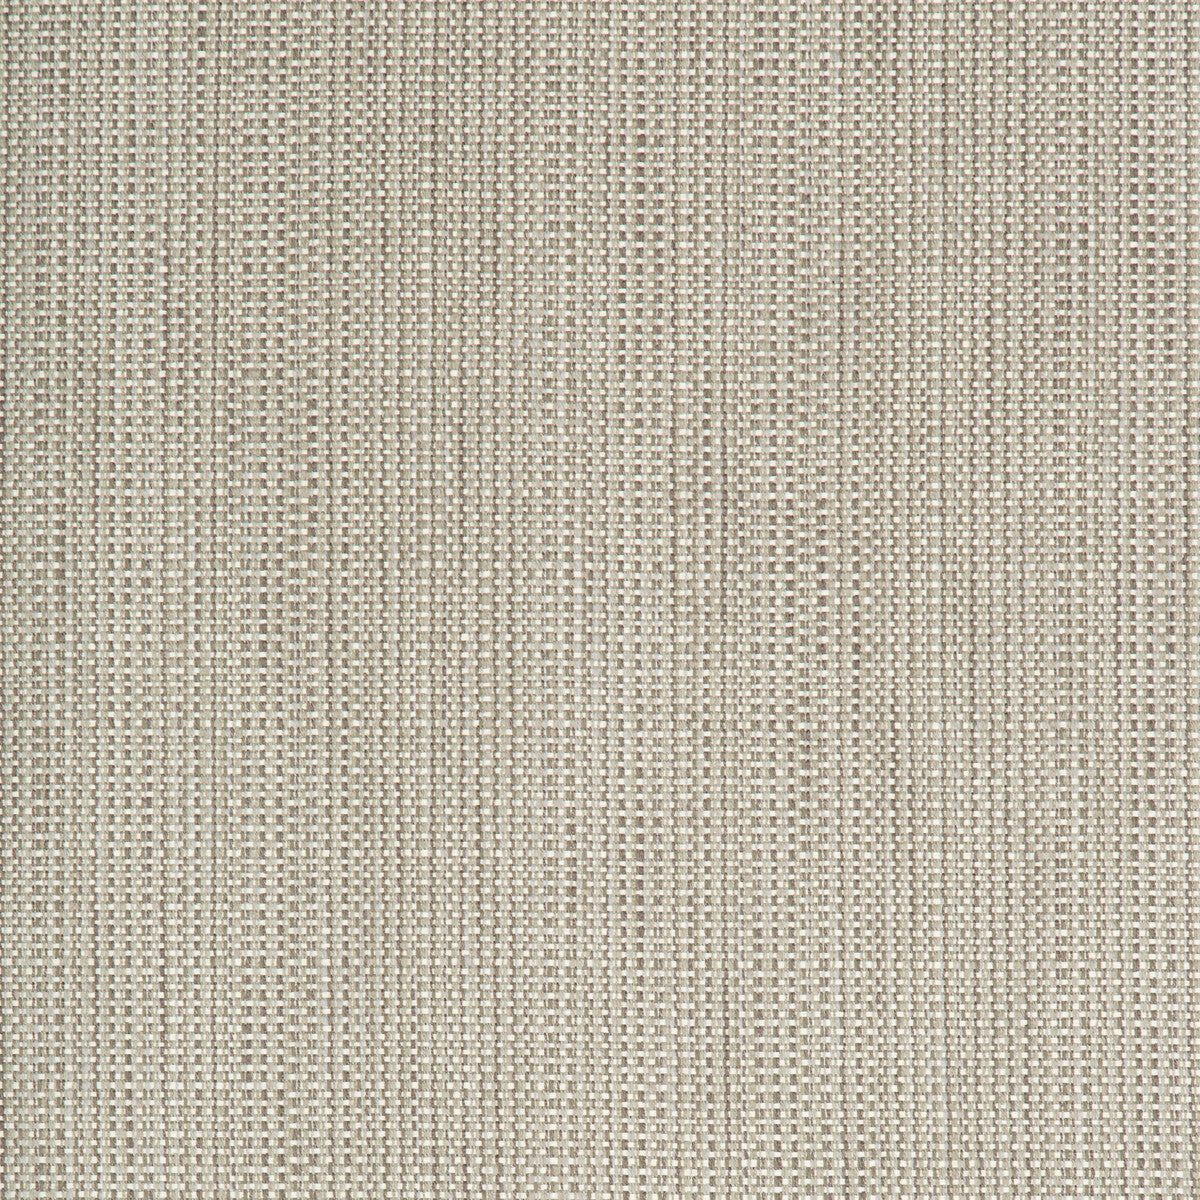 Kravet Smart fabric in 34627-11 color - pattern 34627.11.0 - by Kravet Smart in the Performance Crypton Home collection